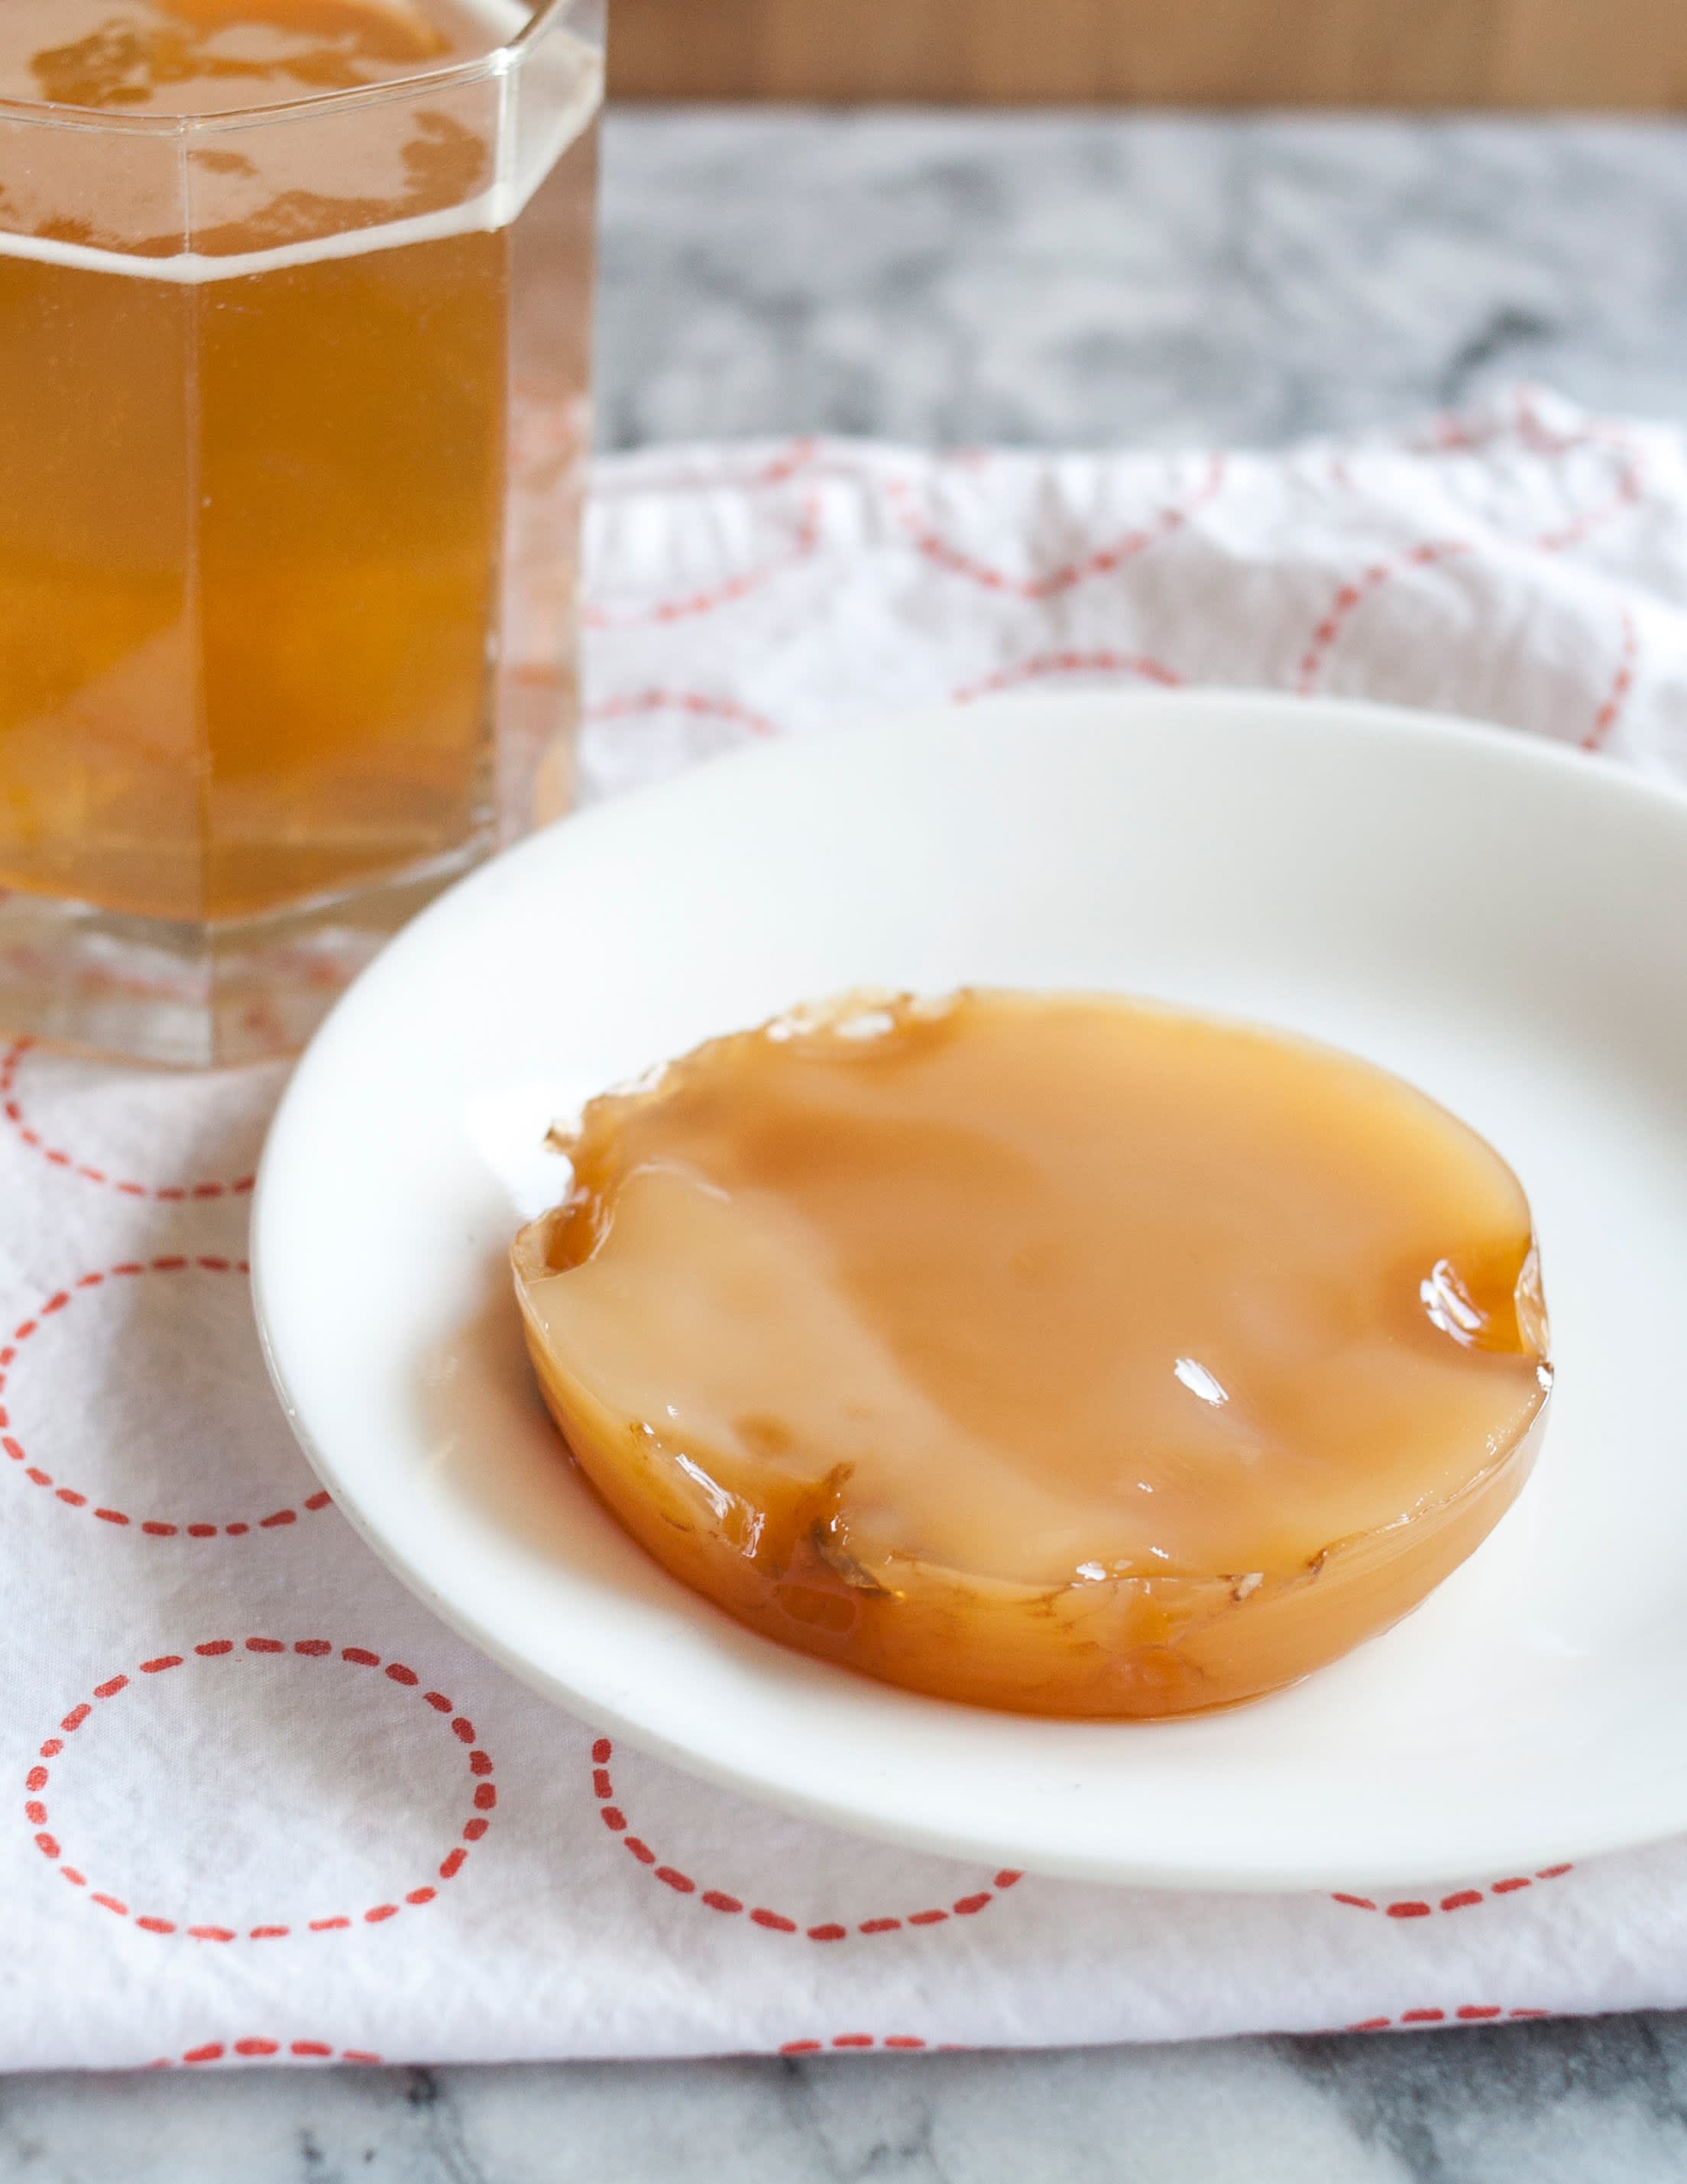 How To Make Your Own Kombucha Scoby (Step-By-Step Recipe) | The Kitchn